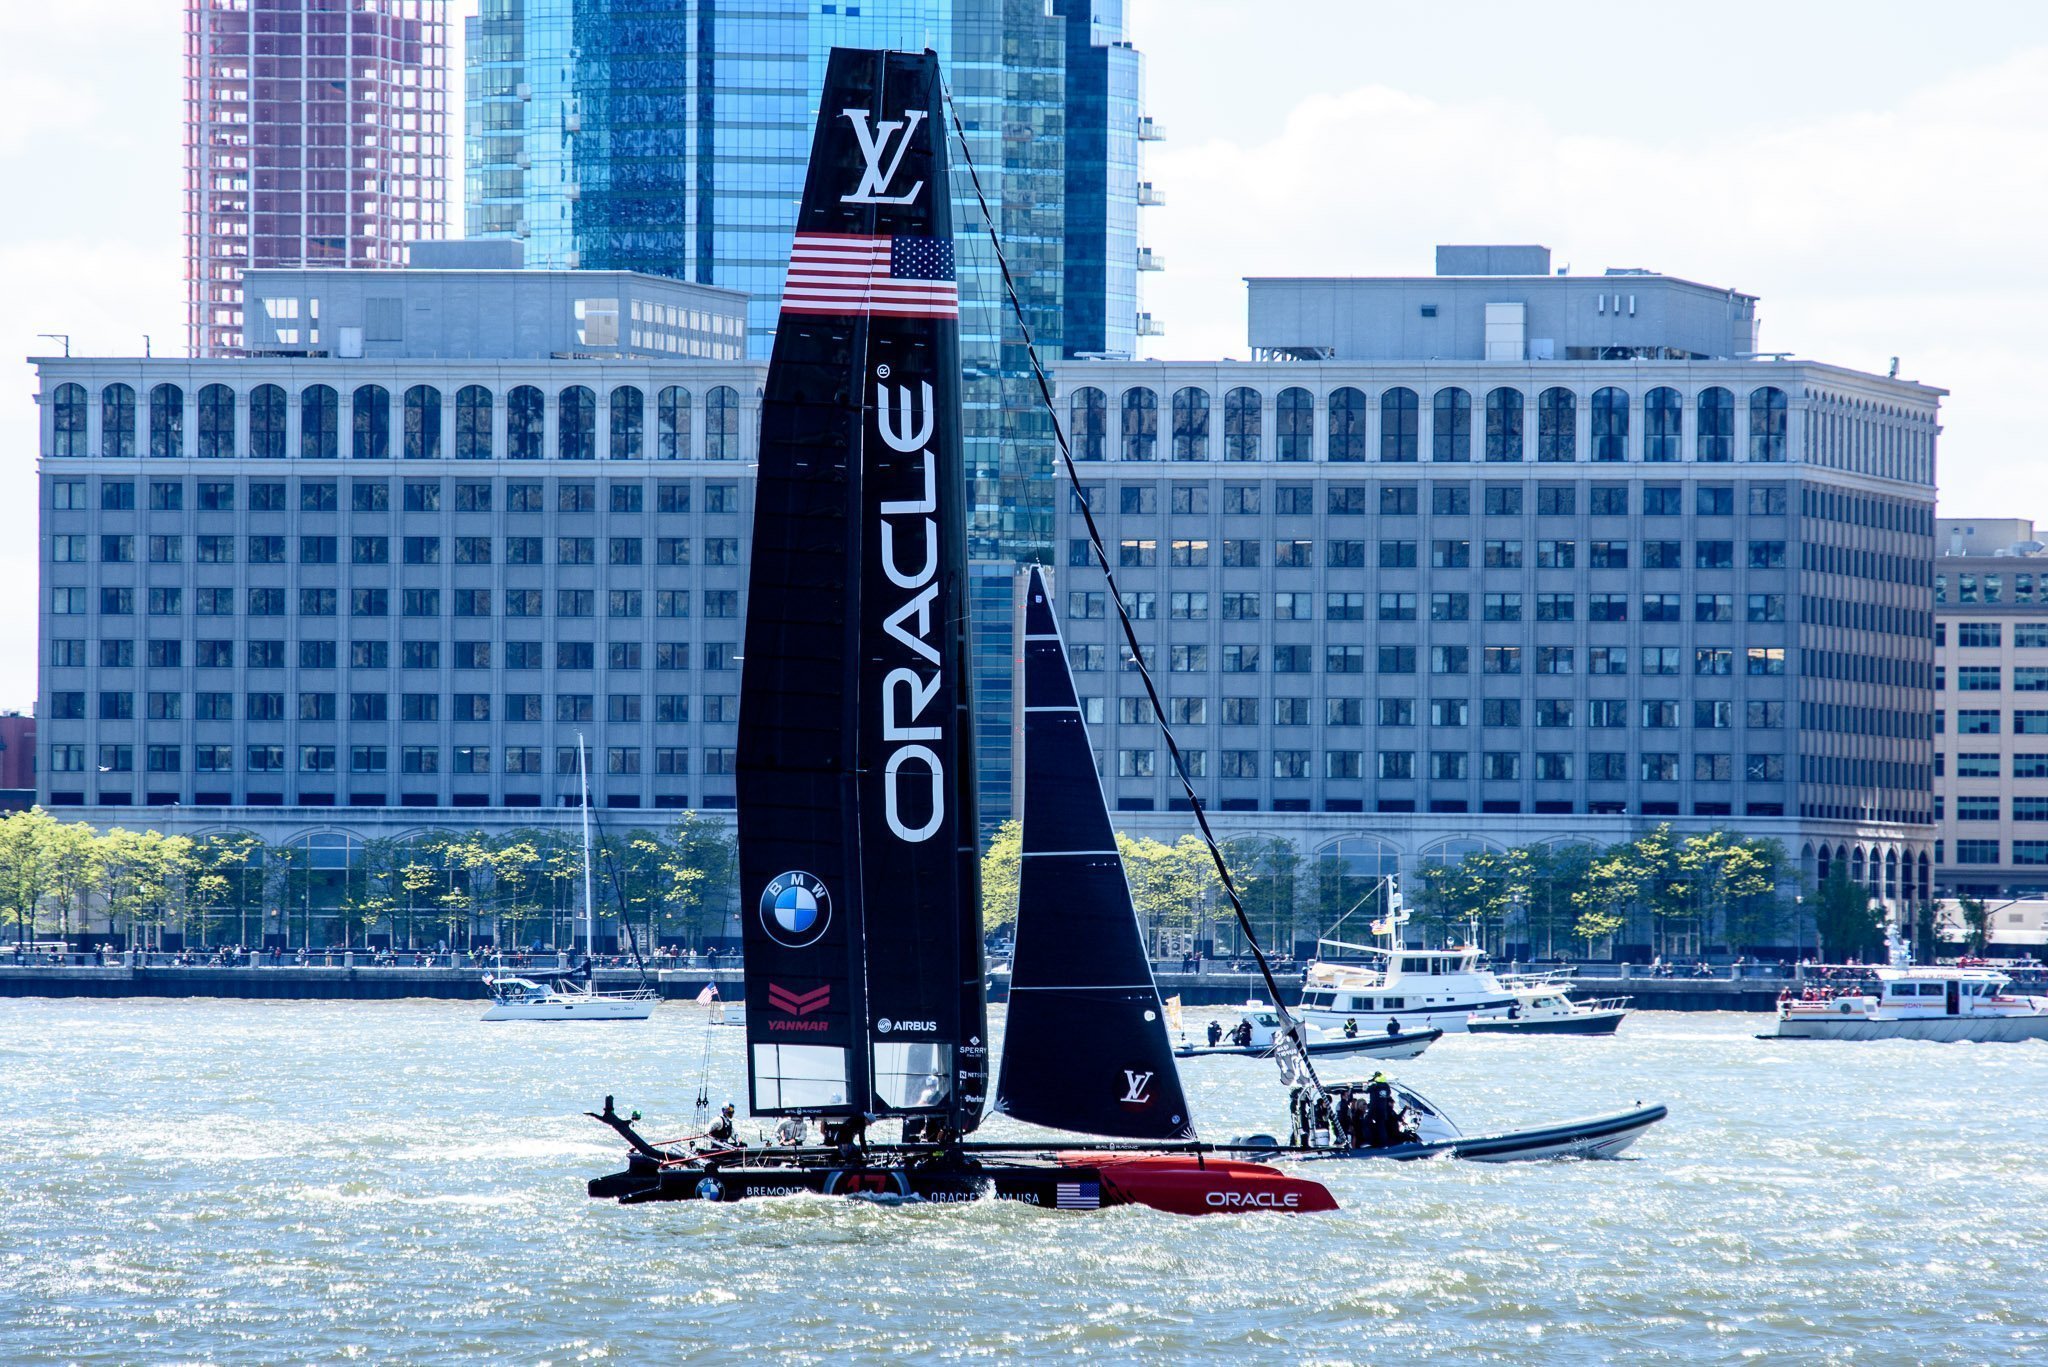 Oracle France America's Cup